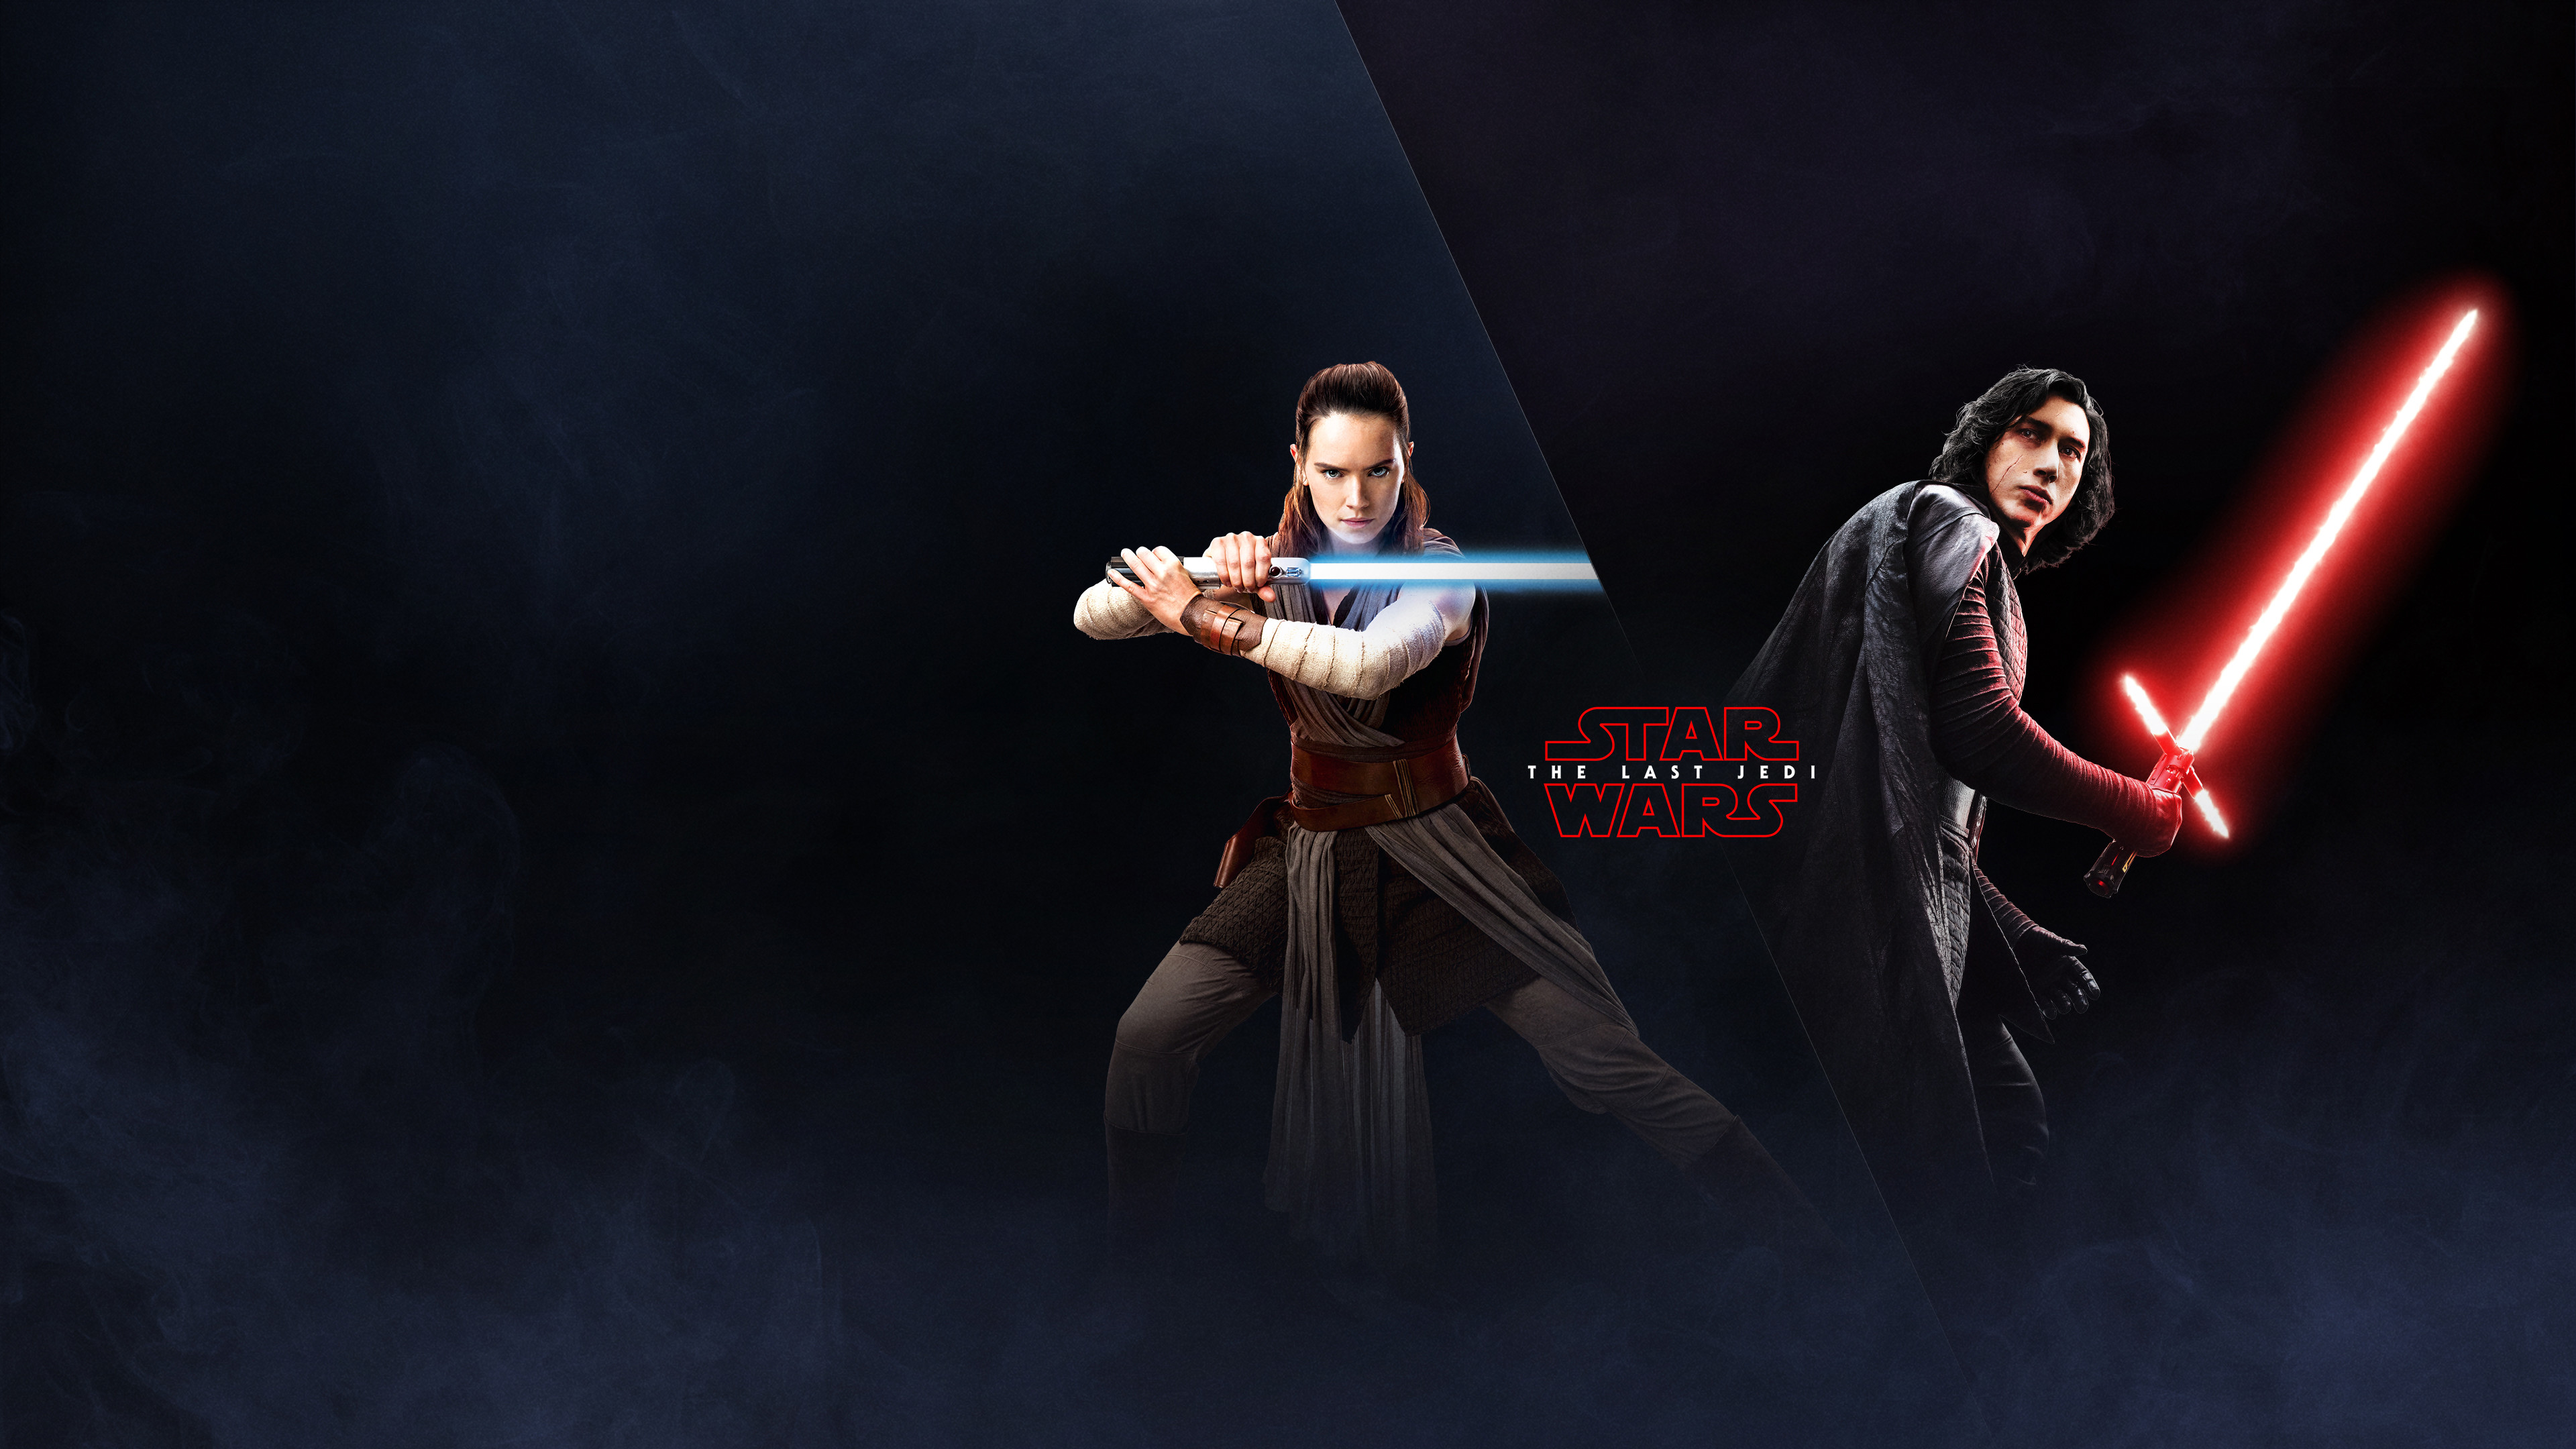 3840x2160 The Last Jedi Wallpaper Rey and Kylo Ren EA Battlefront 2 Poster